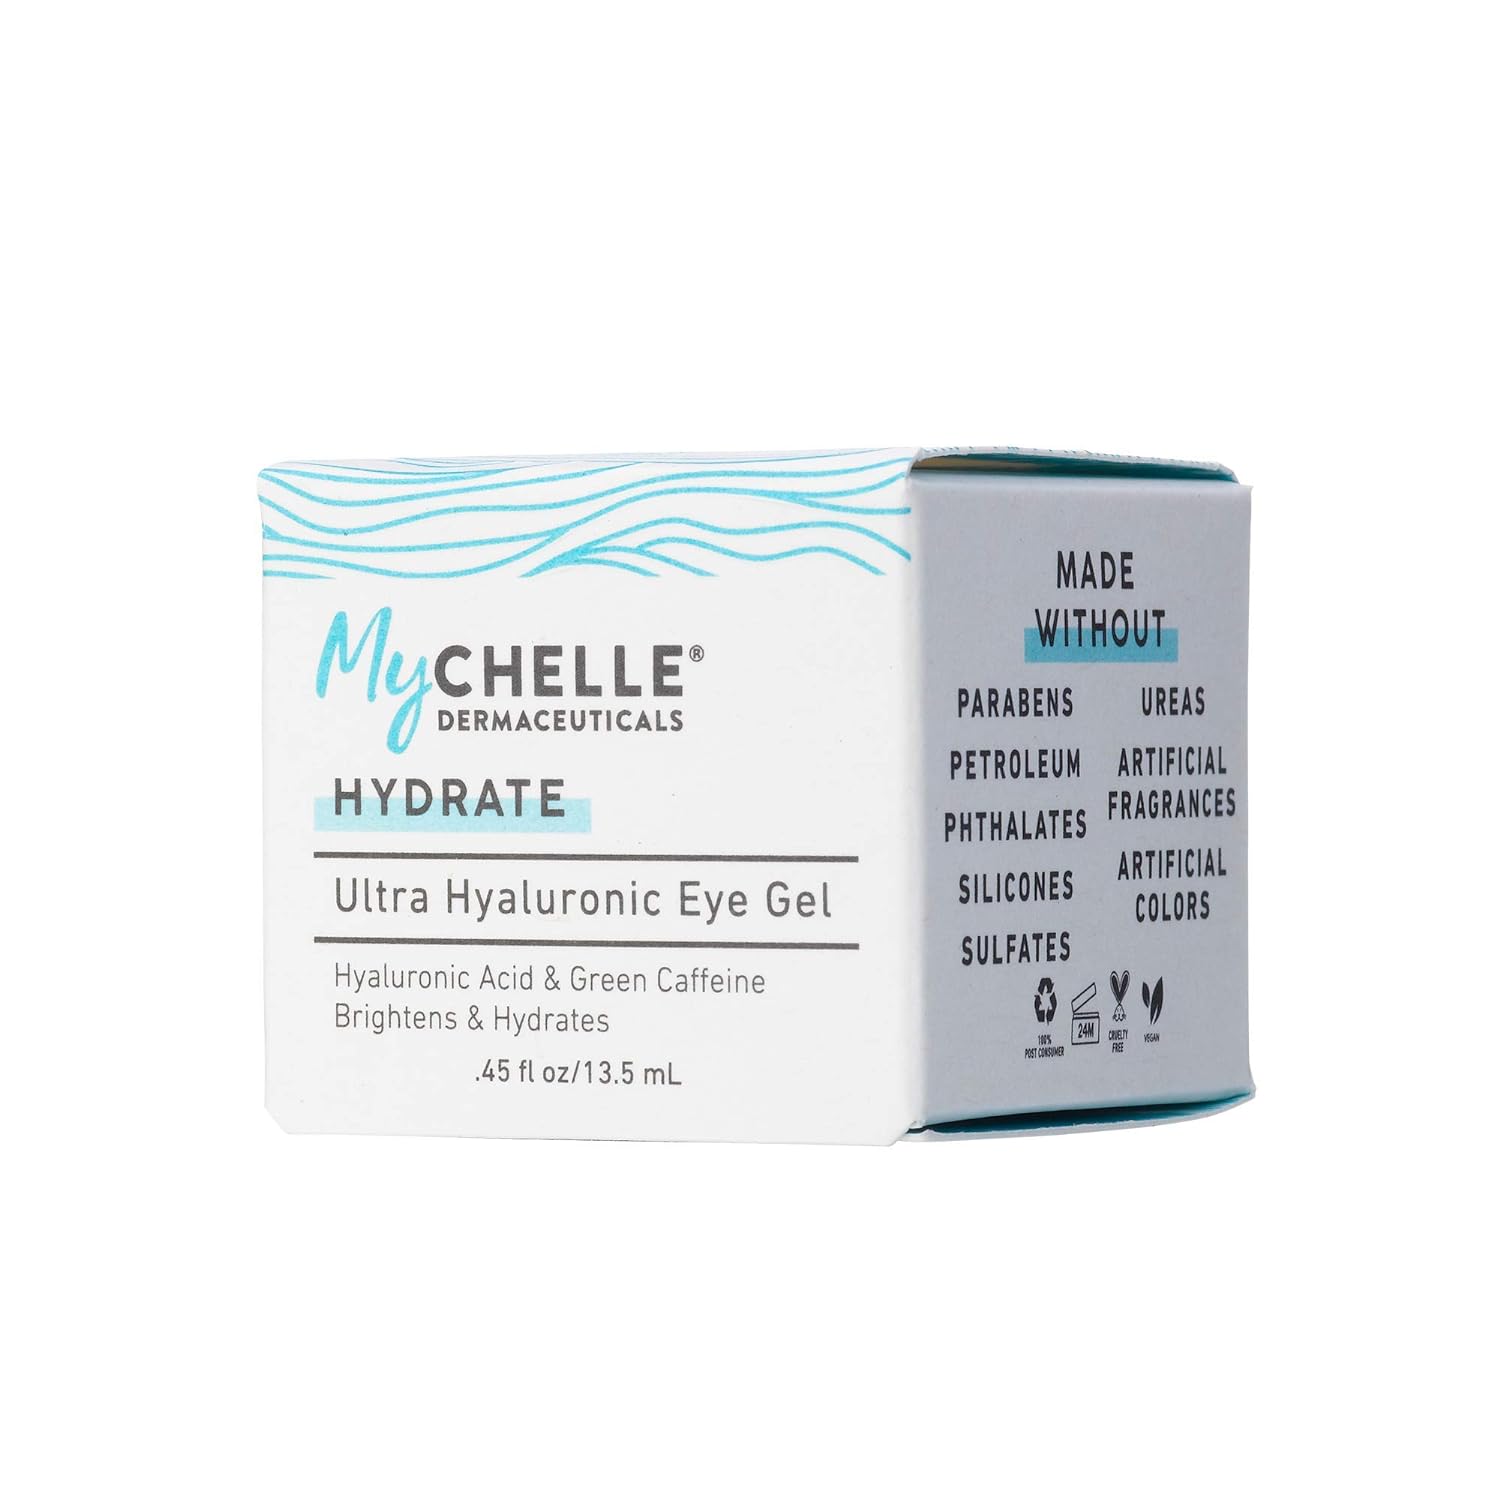 MyChelle Dermaceuticals Ultra Hyaluronic Eye Gel (0.45 Fl Oz) - Rich Hydration for Dry Skin with Vegan Hyaluronic Acid, Help Plump Skin and Help Reduce Appearance of Fine Lines and Wrinkles : Beauty & Personal Care